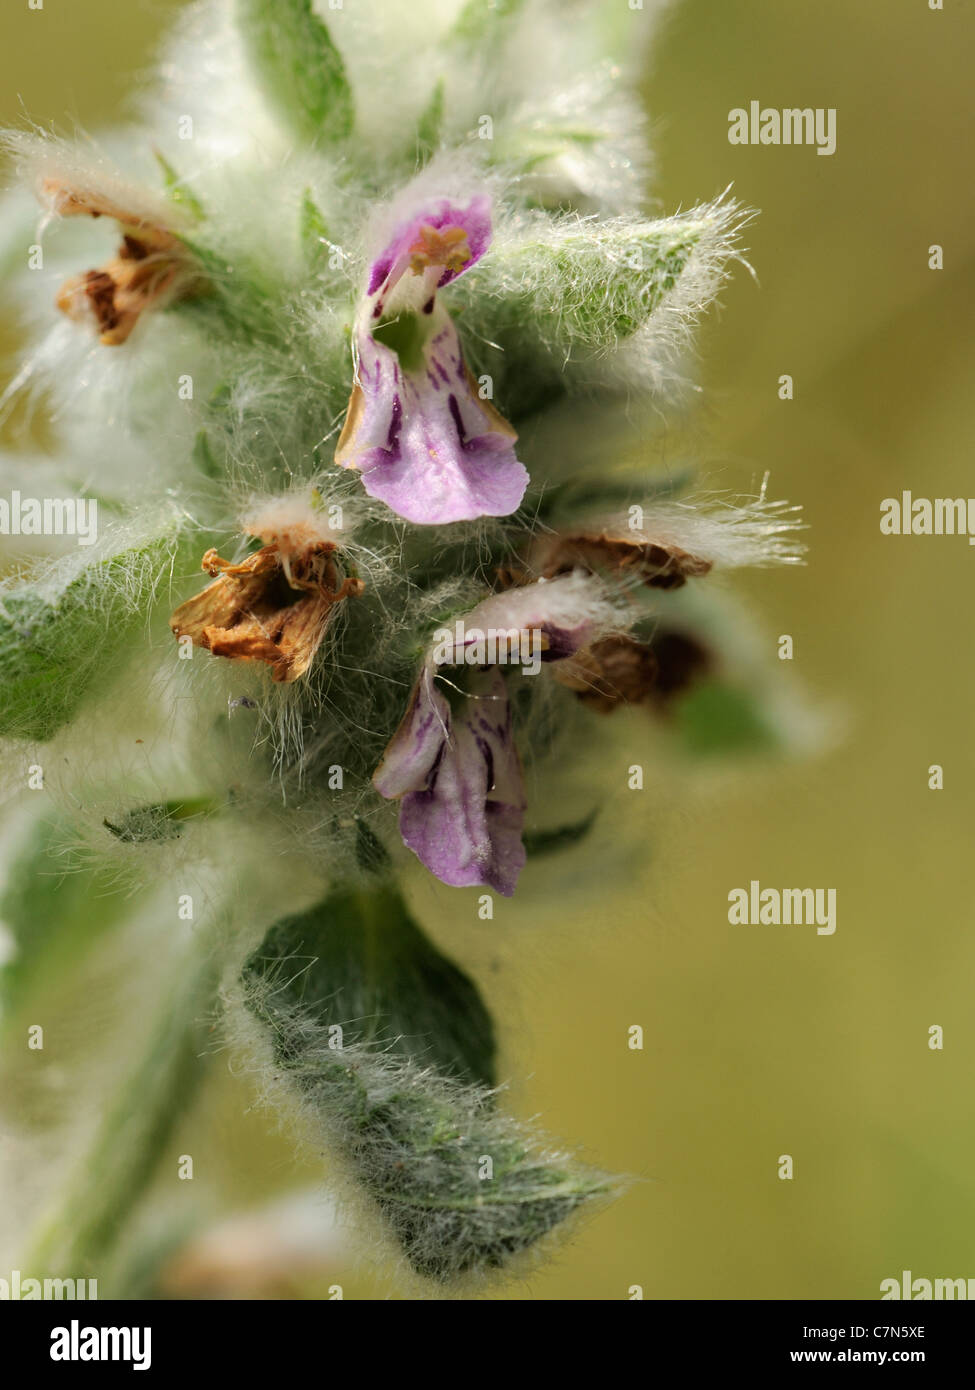 Downy Woundwort, stachys germanica Stock Photo